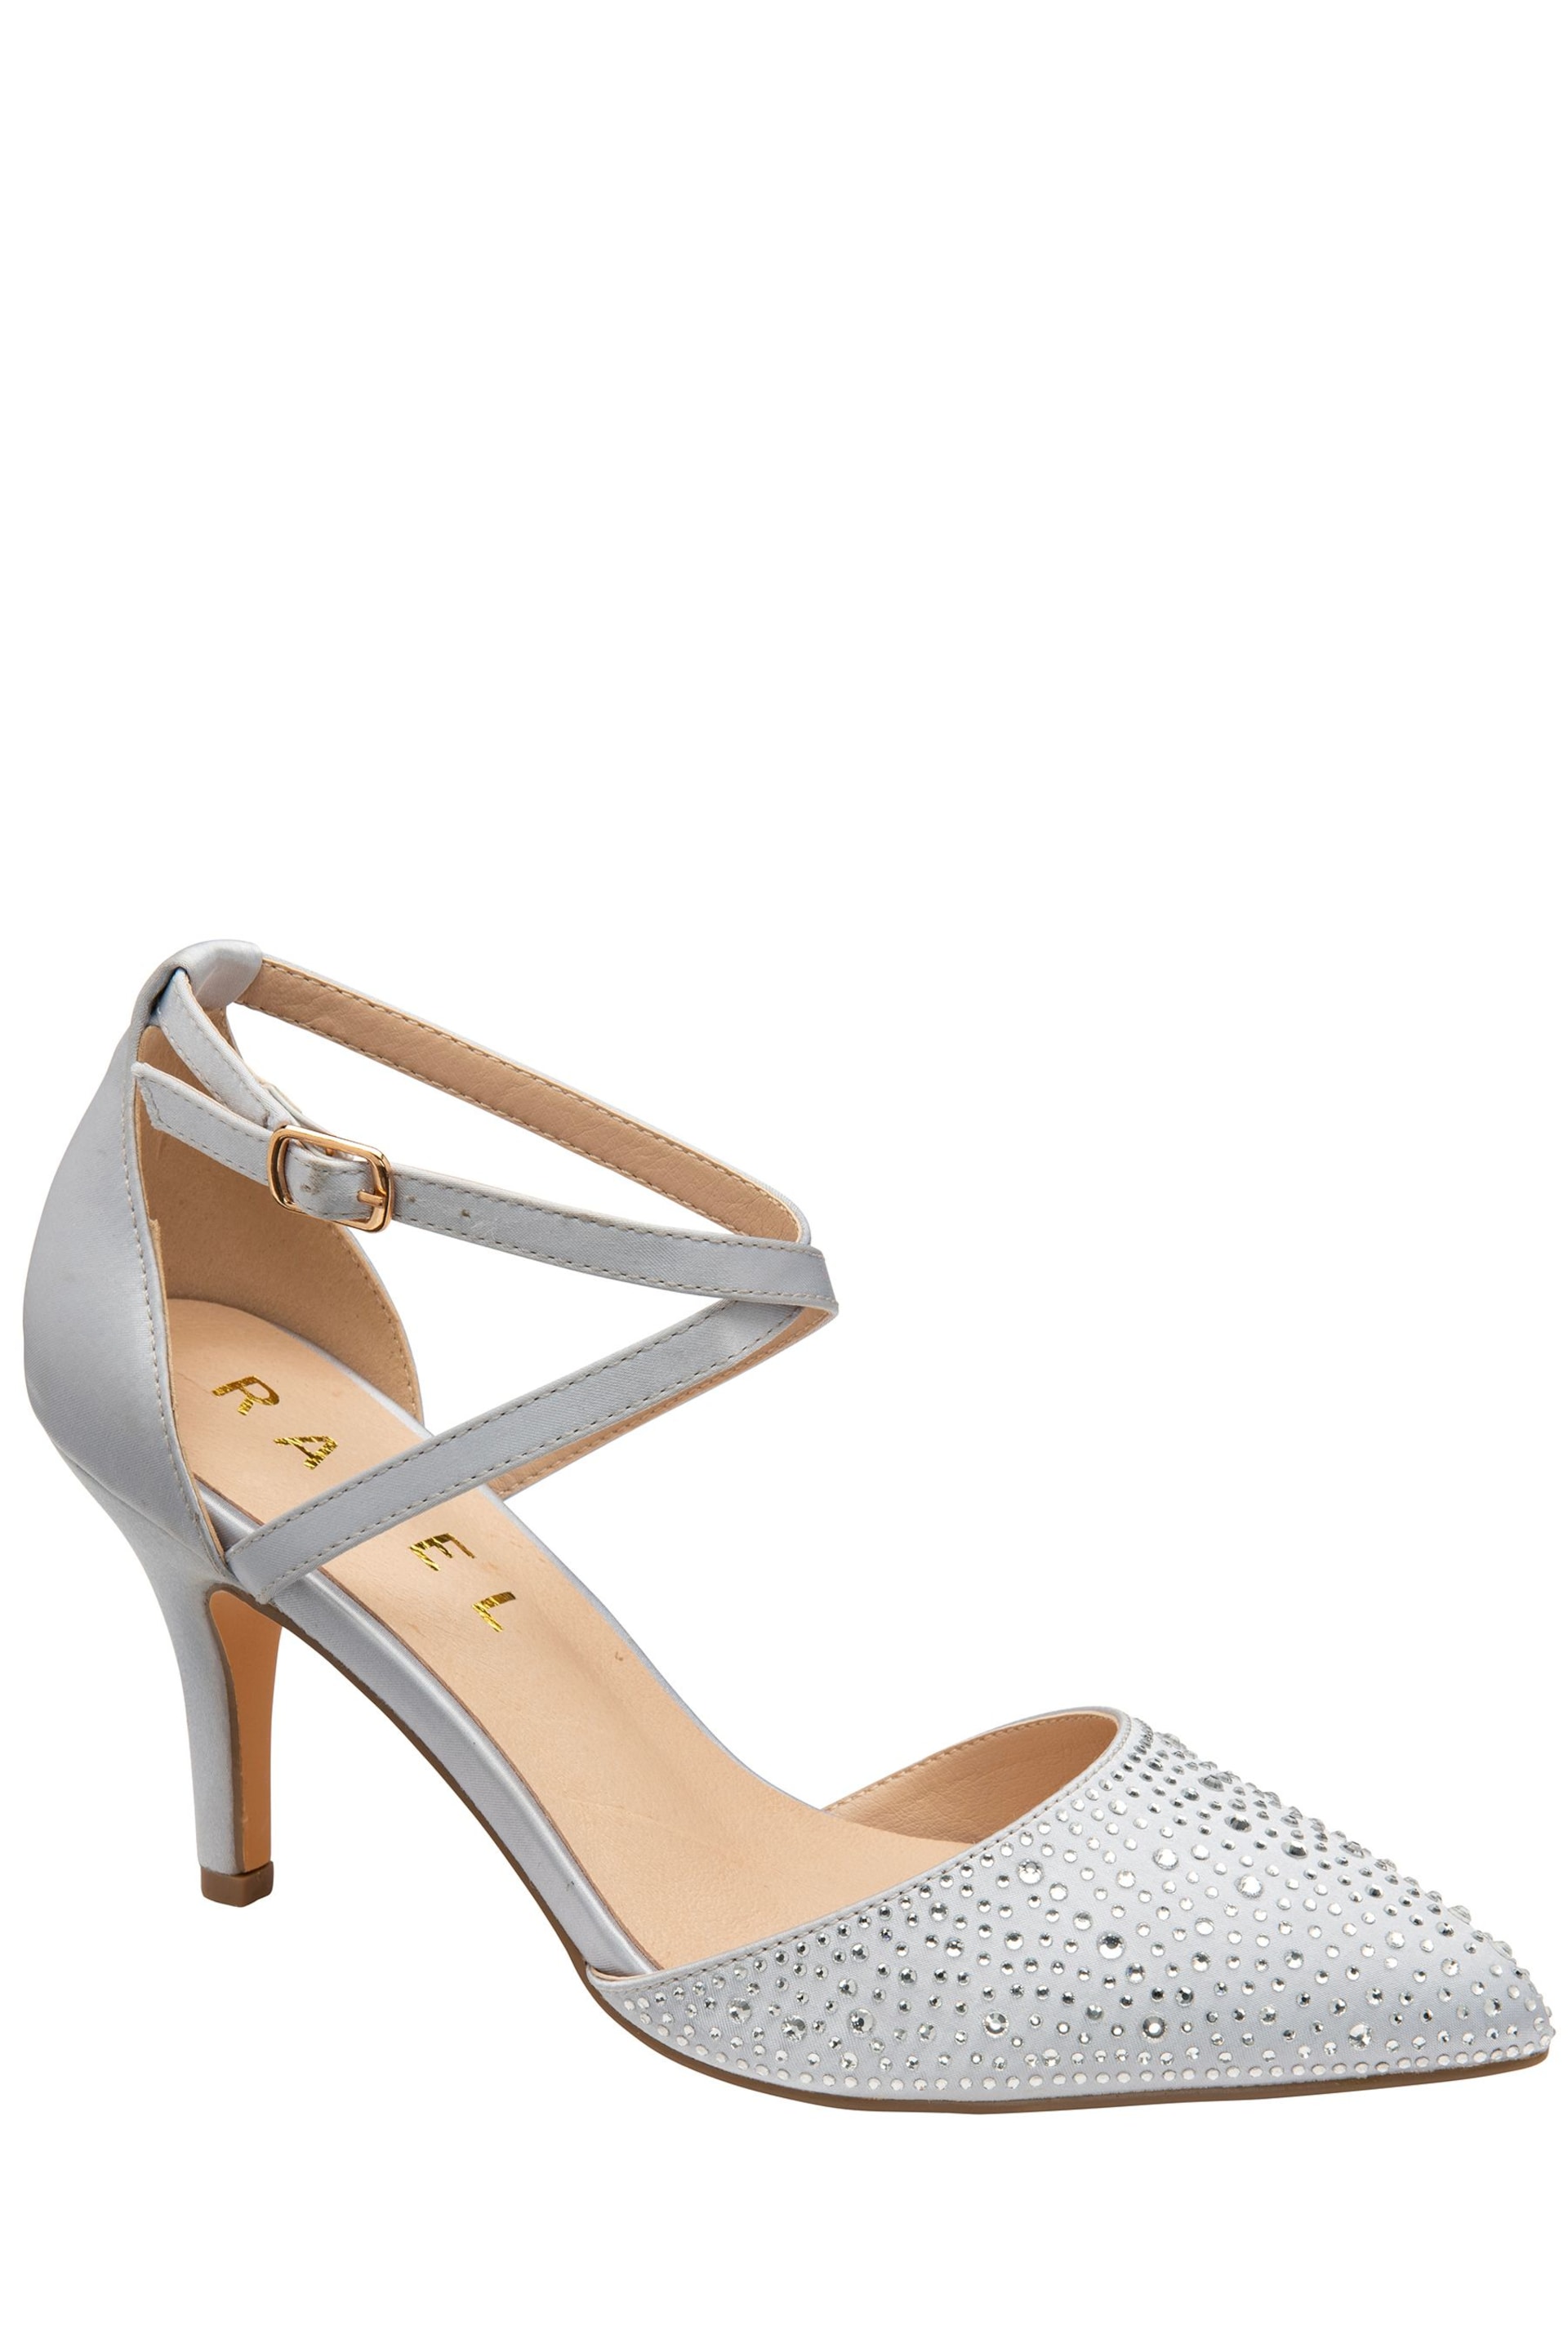 Ravel Silver Strappy Diamante Court Shoes - Image 1 of 4